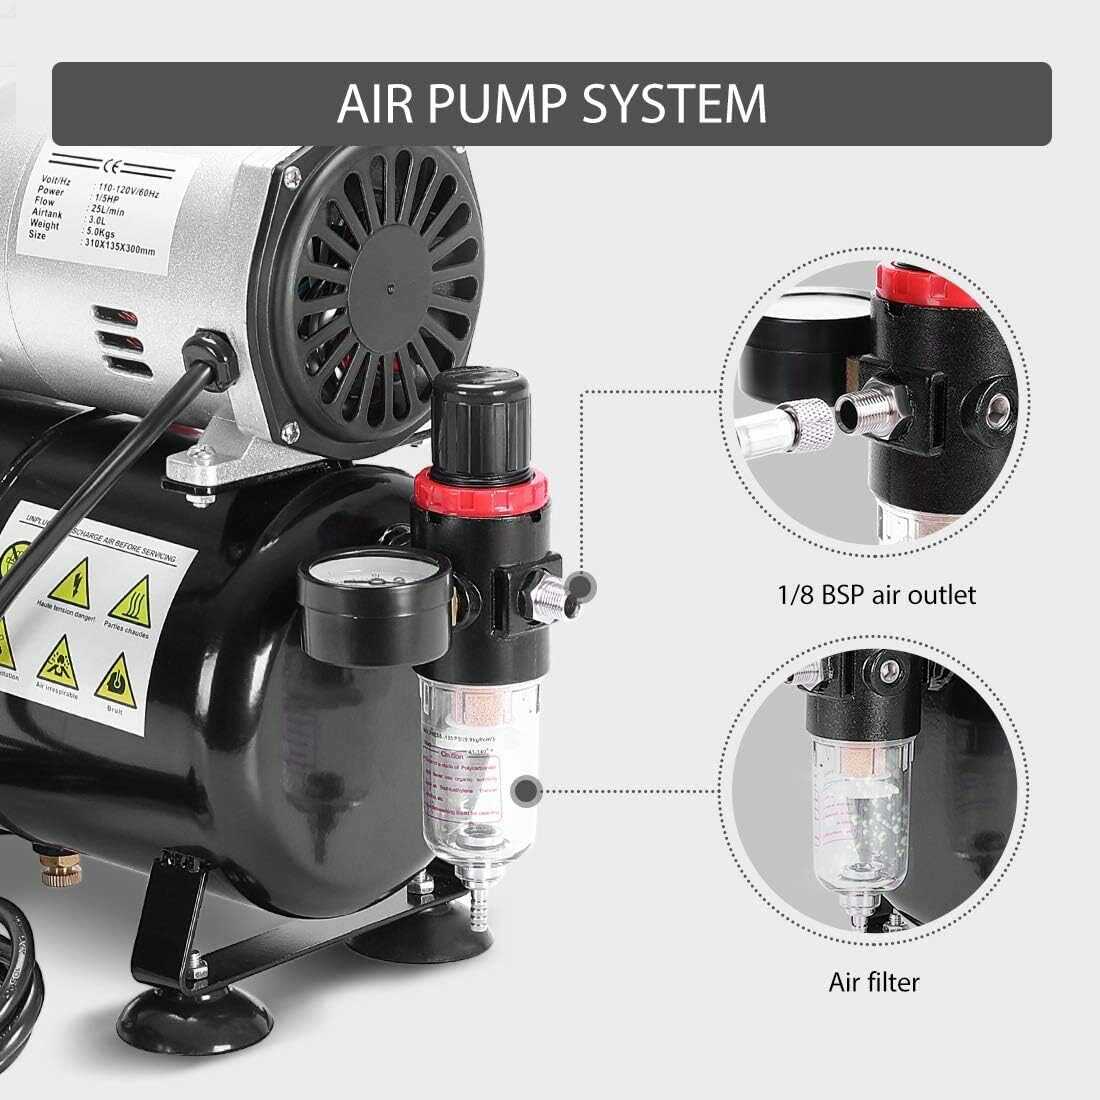 Airbrush Compressor Kit 110-120V Dual Action Airbrushing Paint System w/  1/5 HP